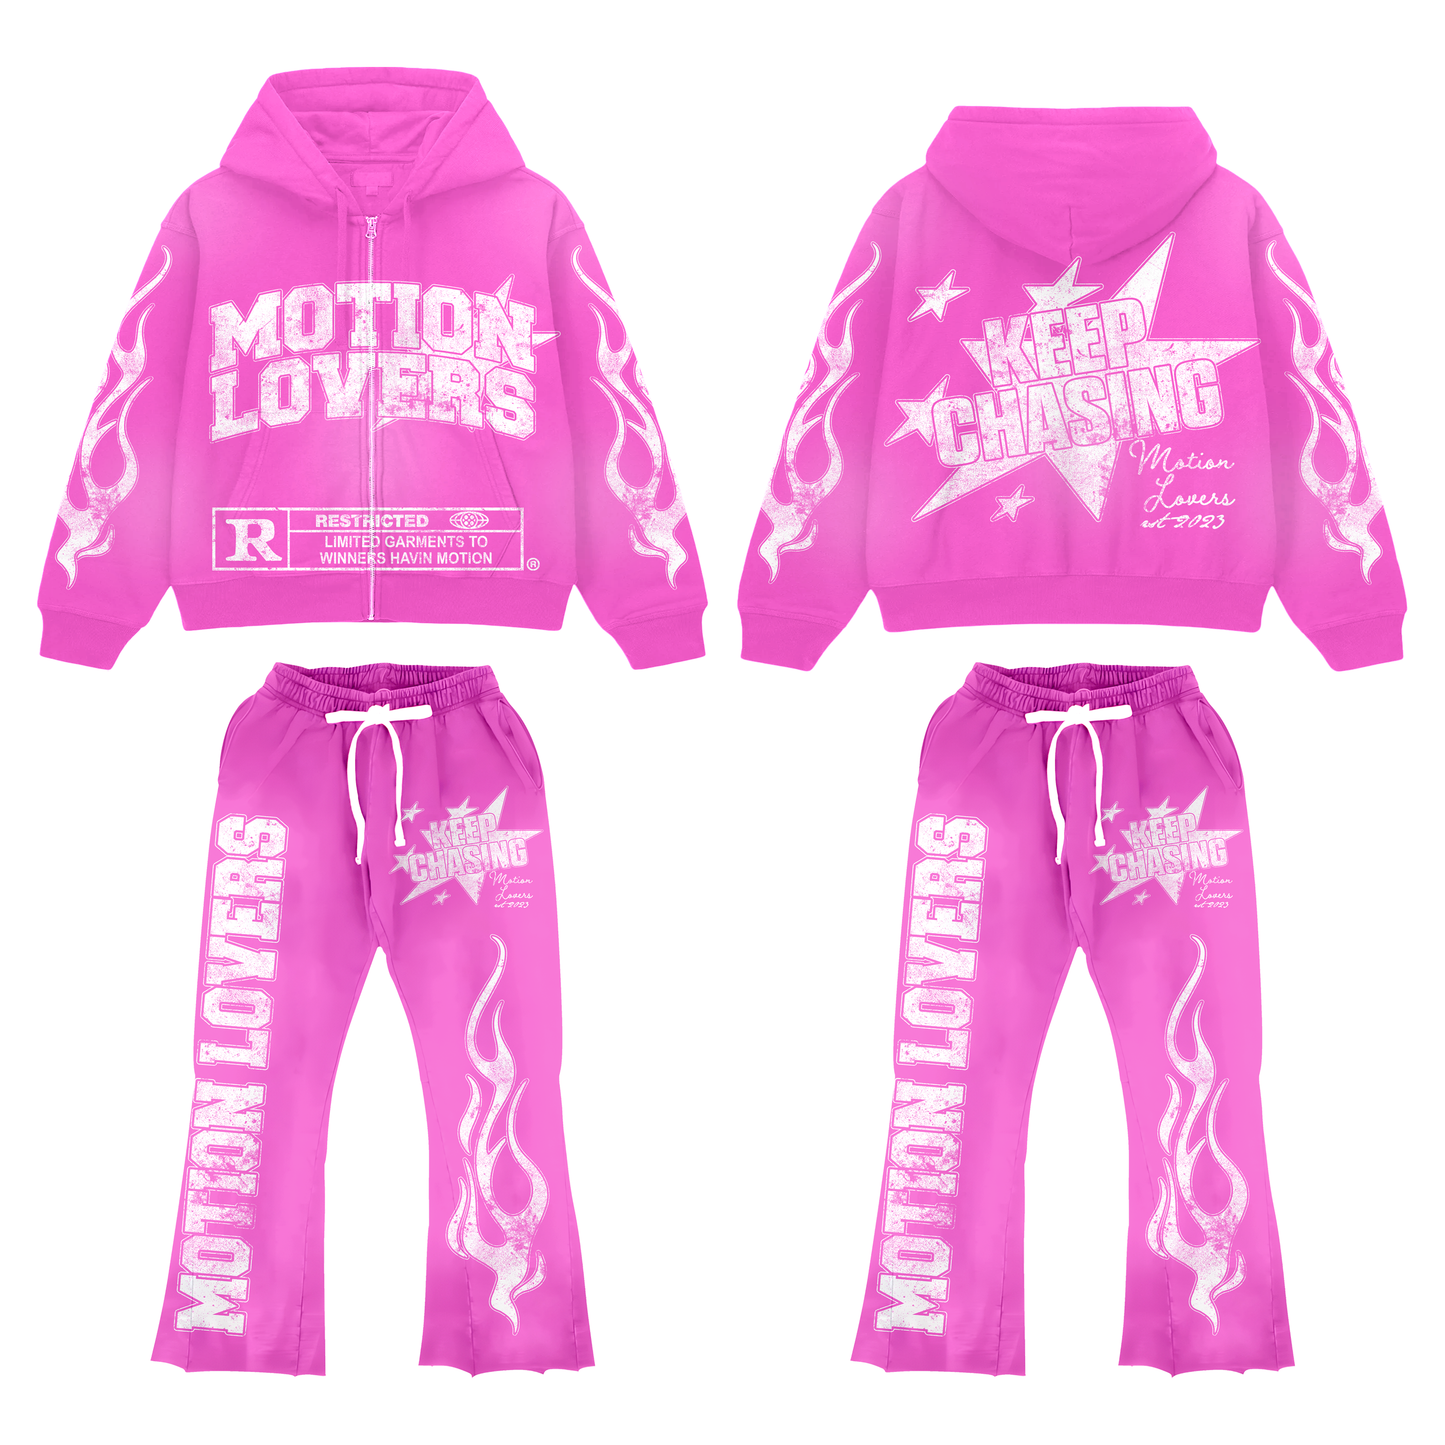 Motionlovers Pink Rated R Set